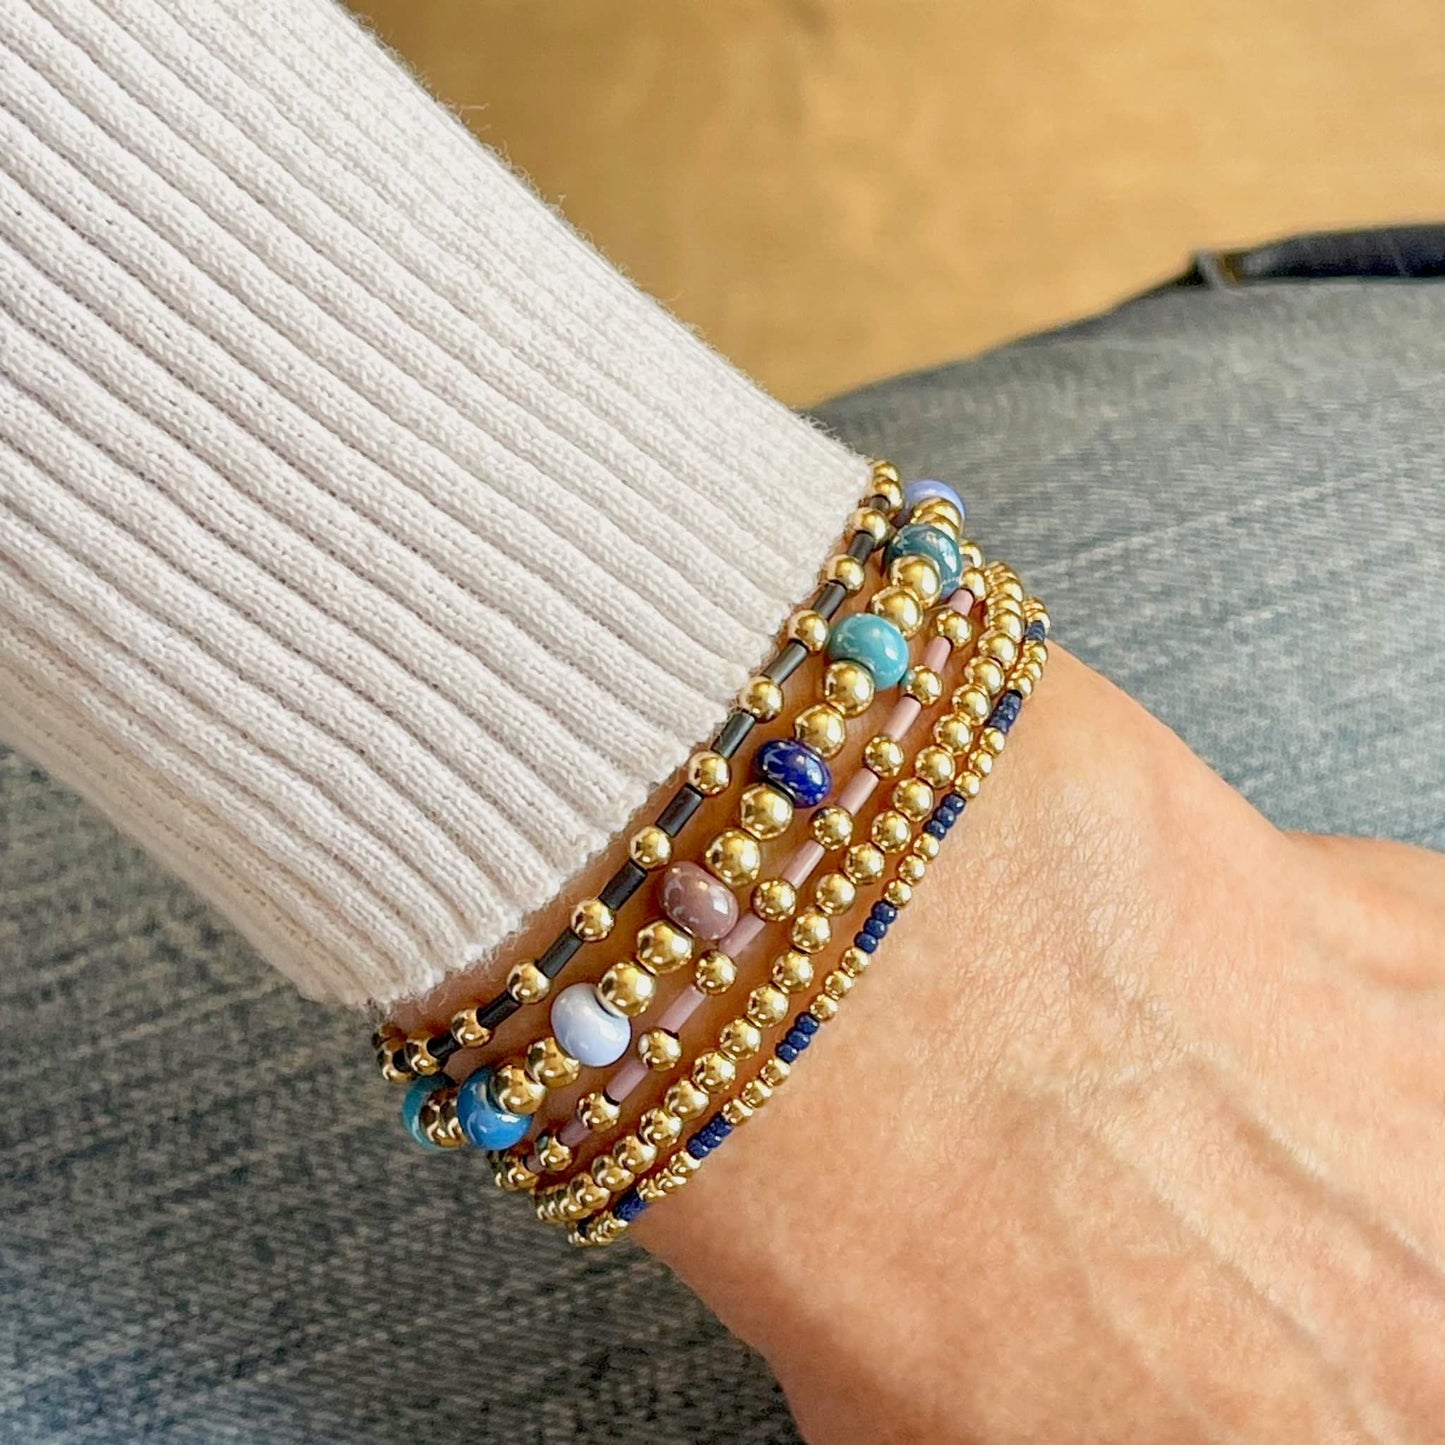 Gold bead bracelet stack of 5 stretch bracelets with blue and purple accent beads.